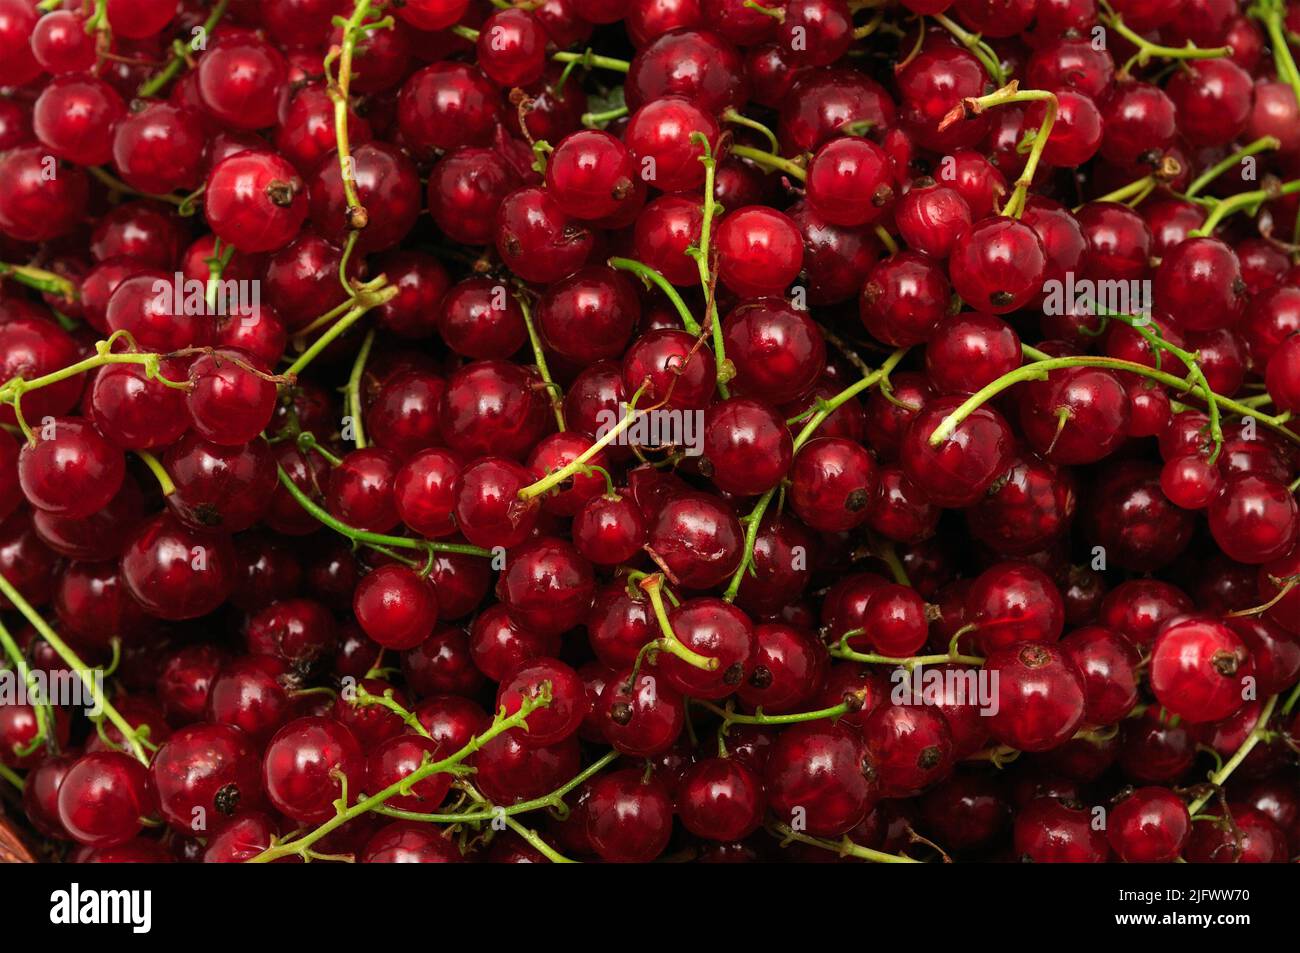 red currant background Stock Photo